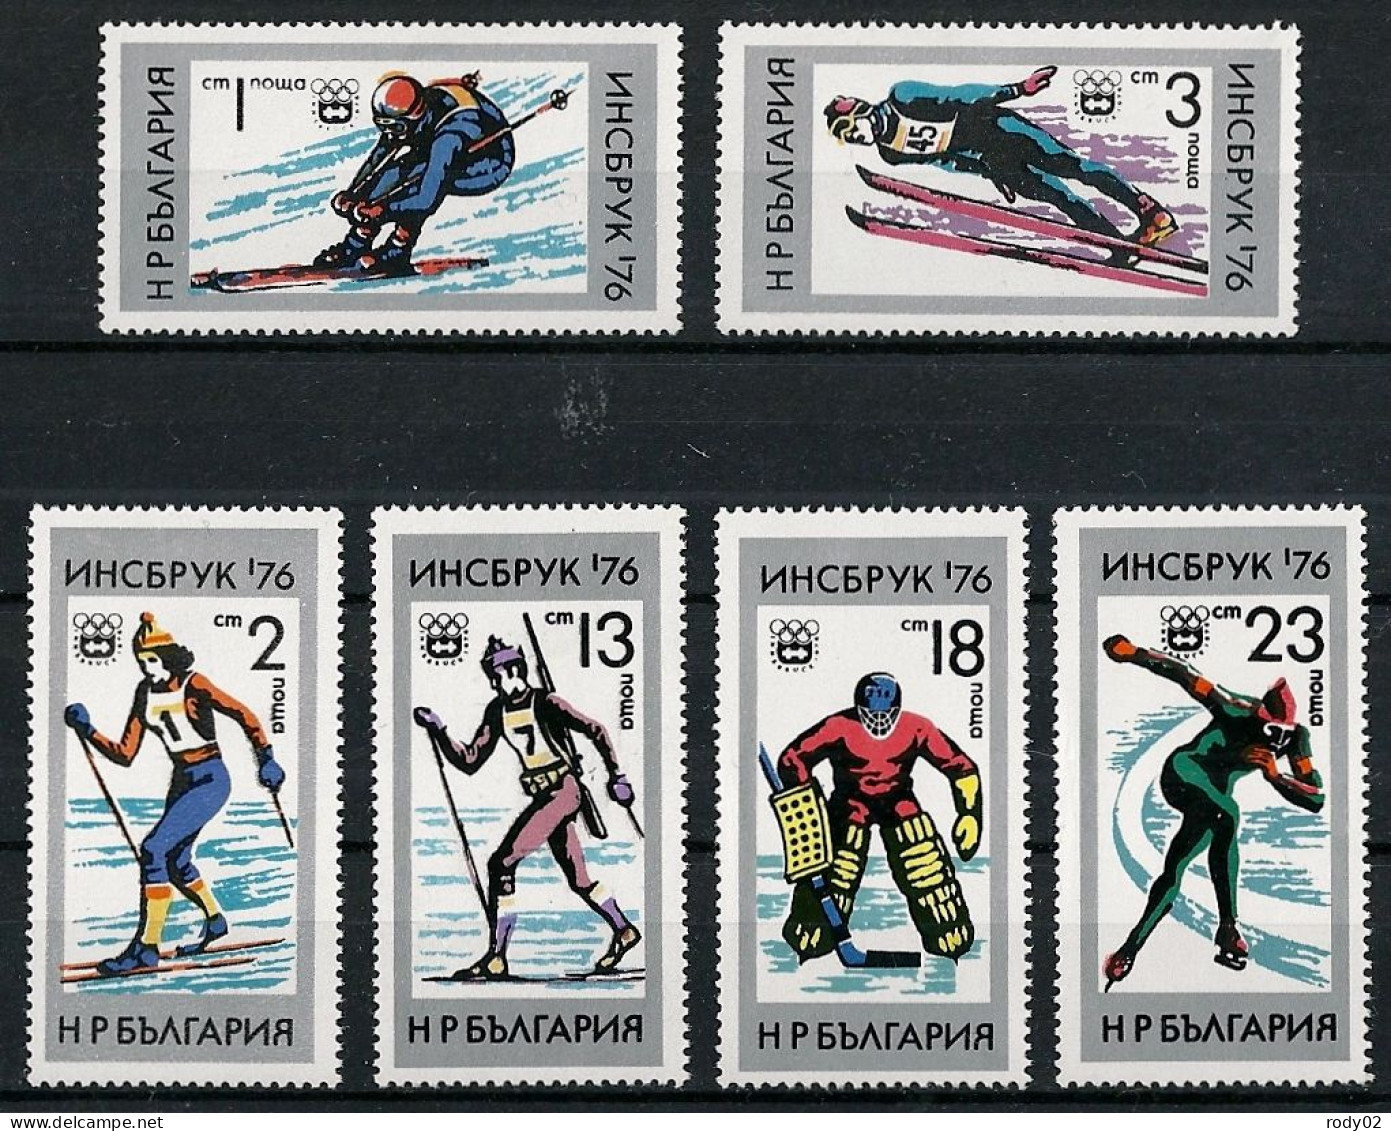 BULGARIE - JEUX OLYMPIQUES D'HIVER A INNSBRUCK  - N° 2186 A 2191 - NEUF** MNH - Invierno 1976: Innsbruck